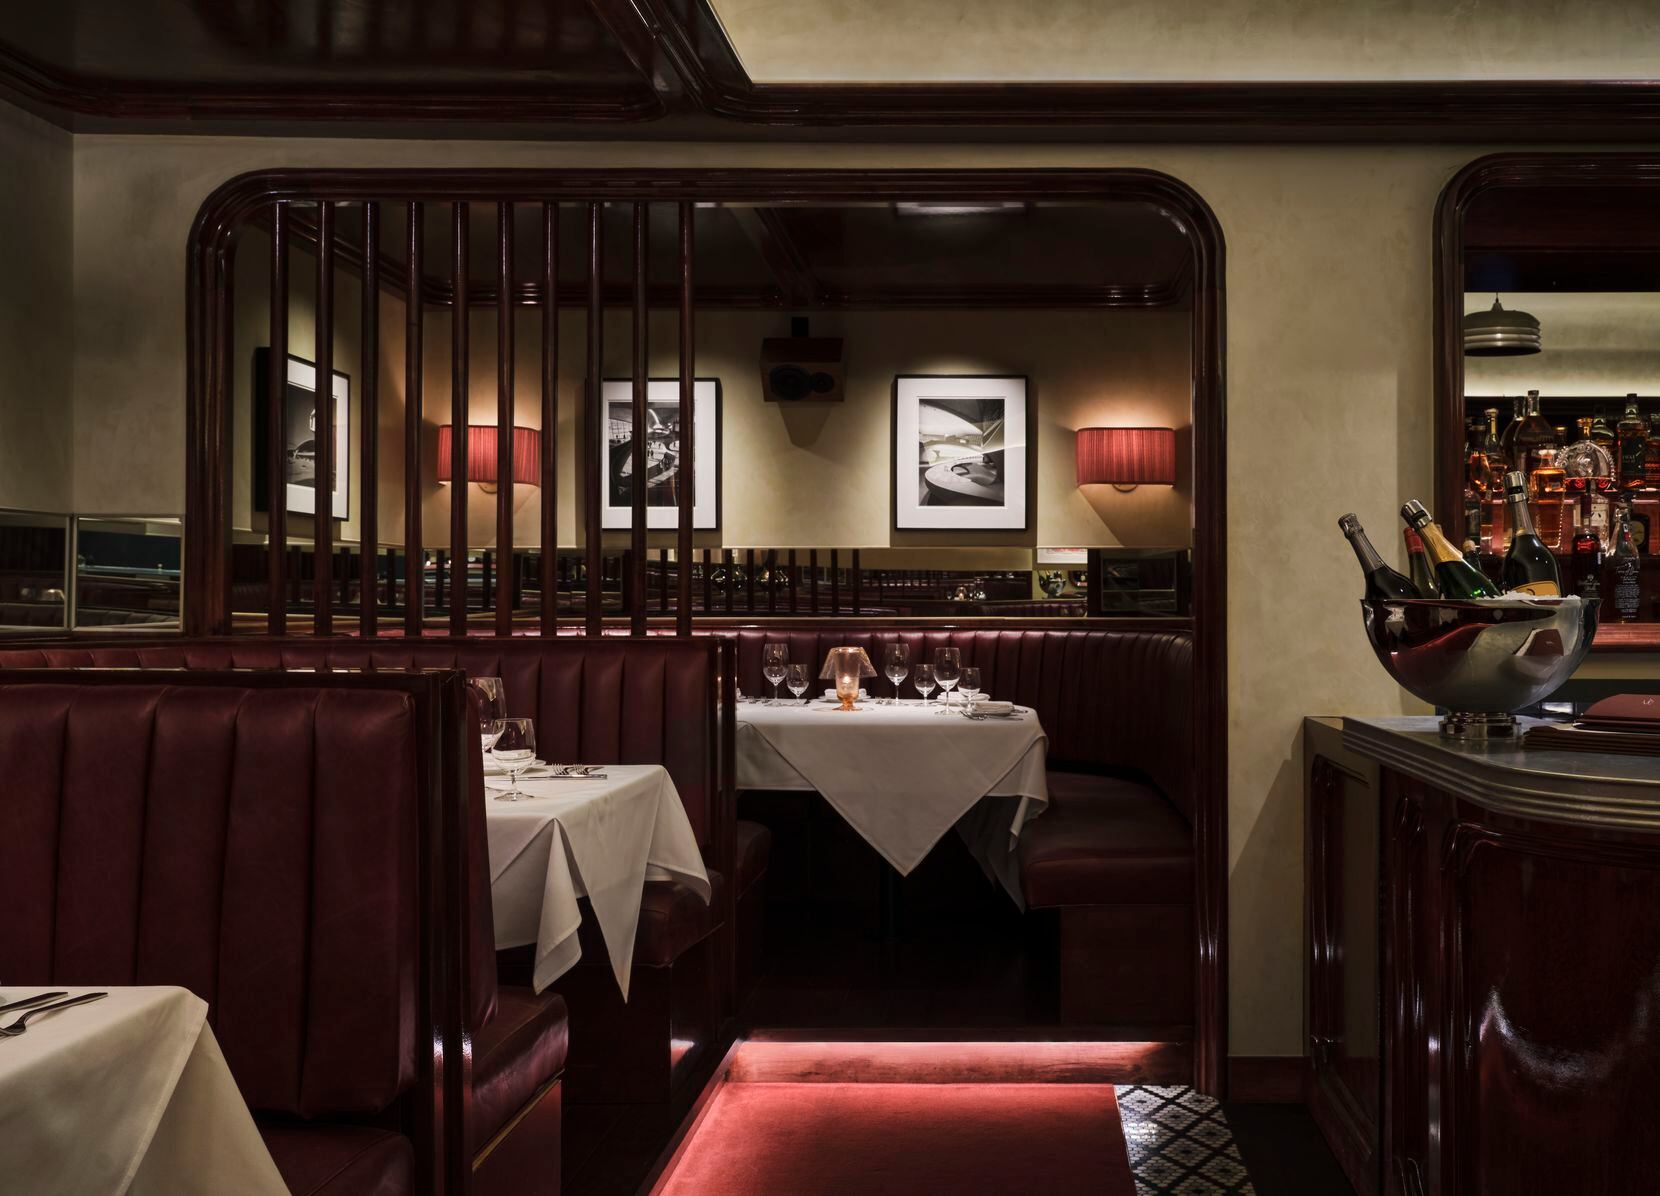 Tango Room is a secluded, small restaurant that's equal parts intimate and upscale. Its...